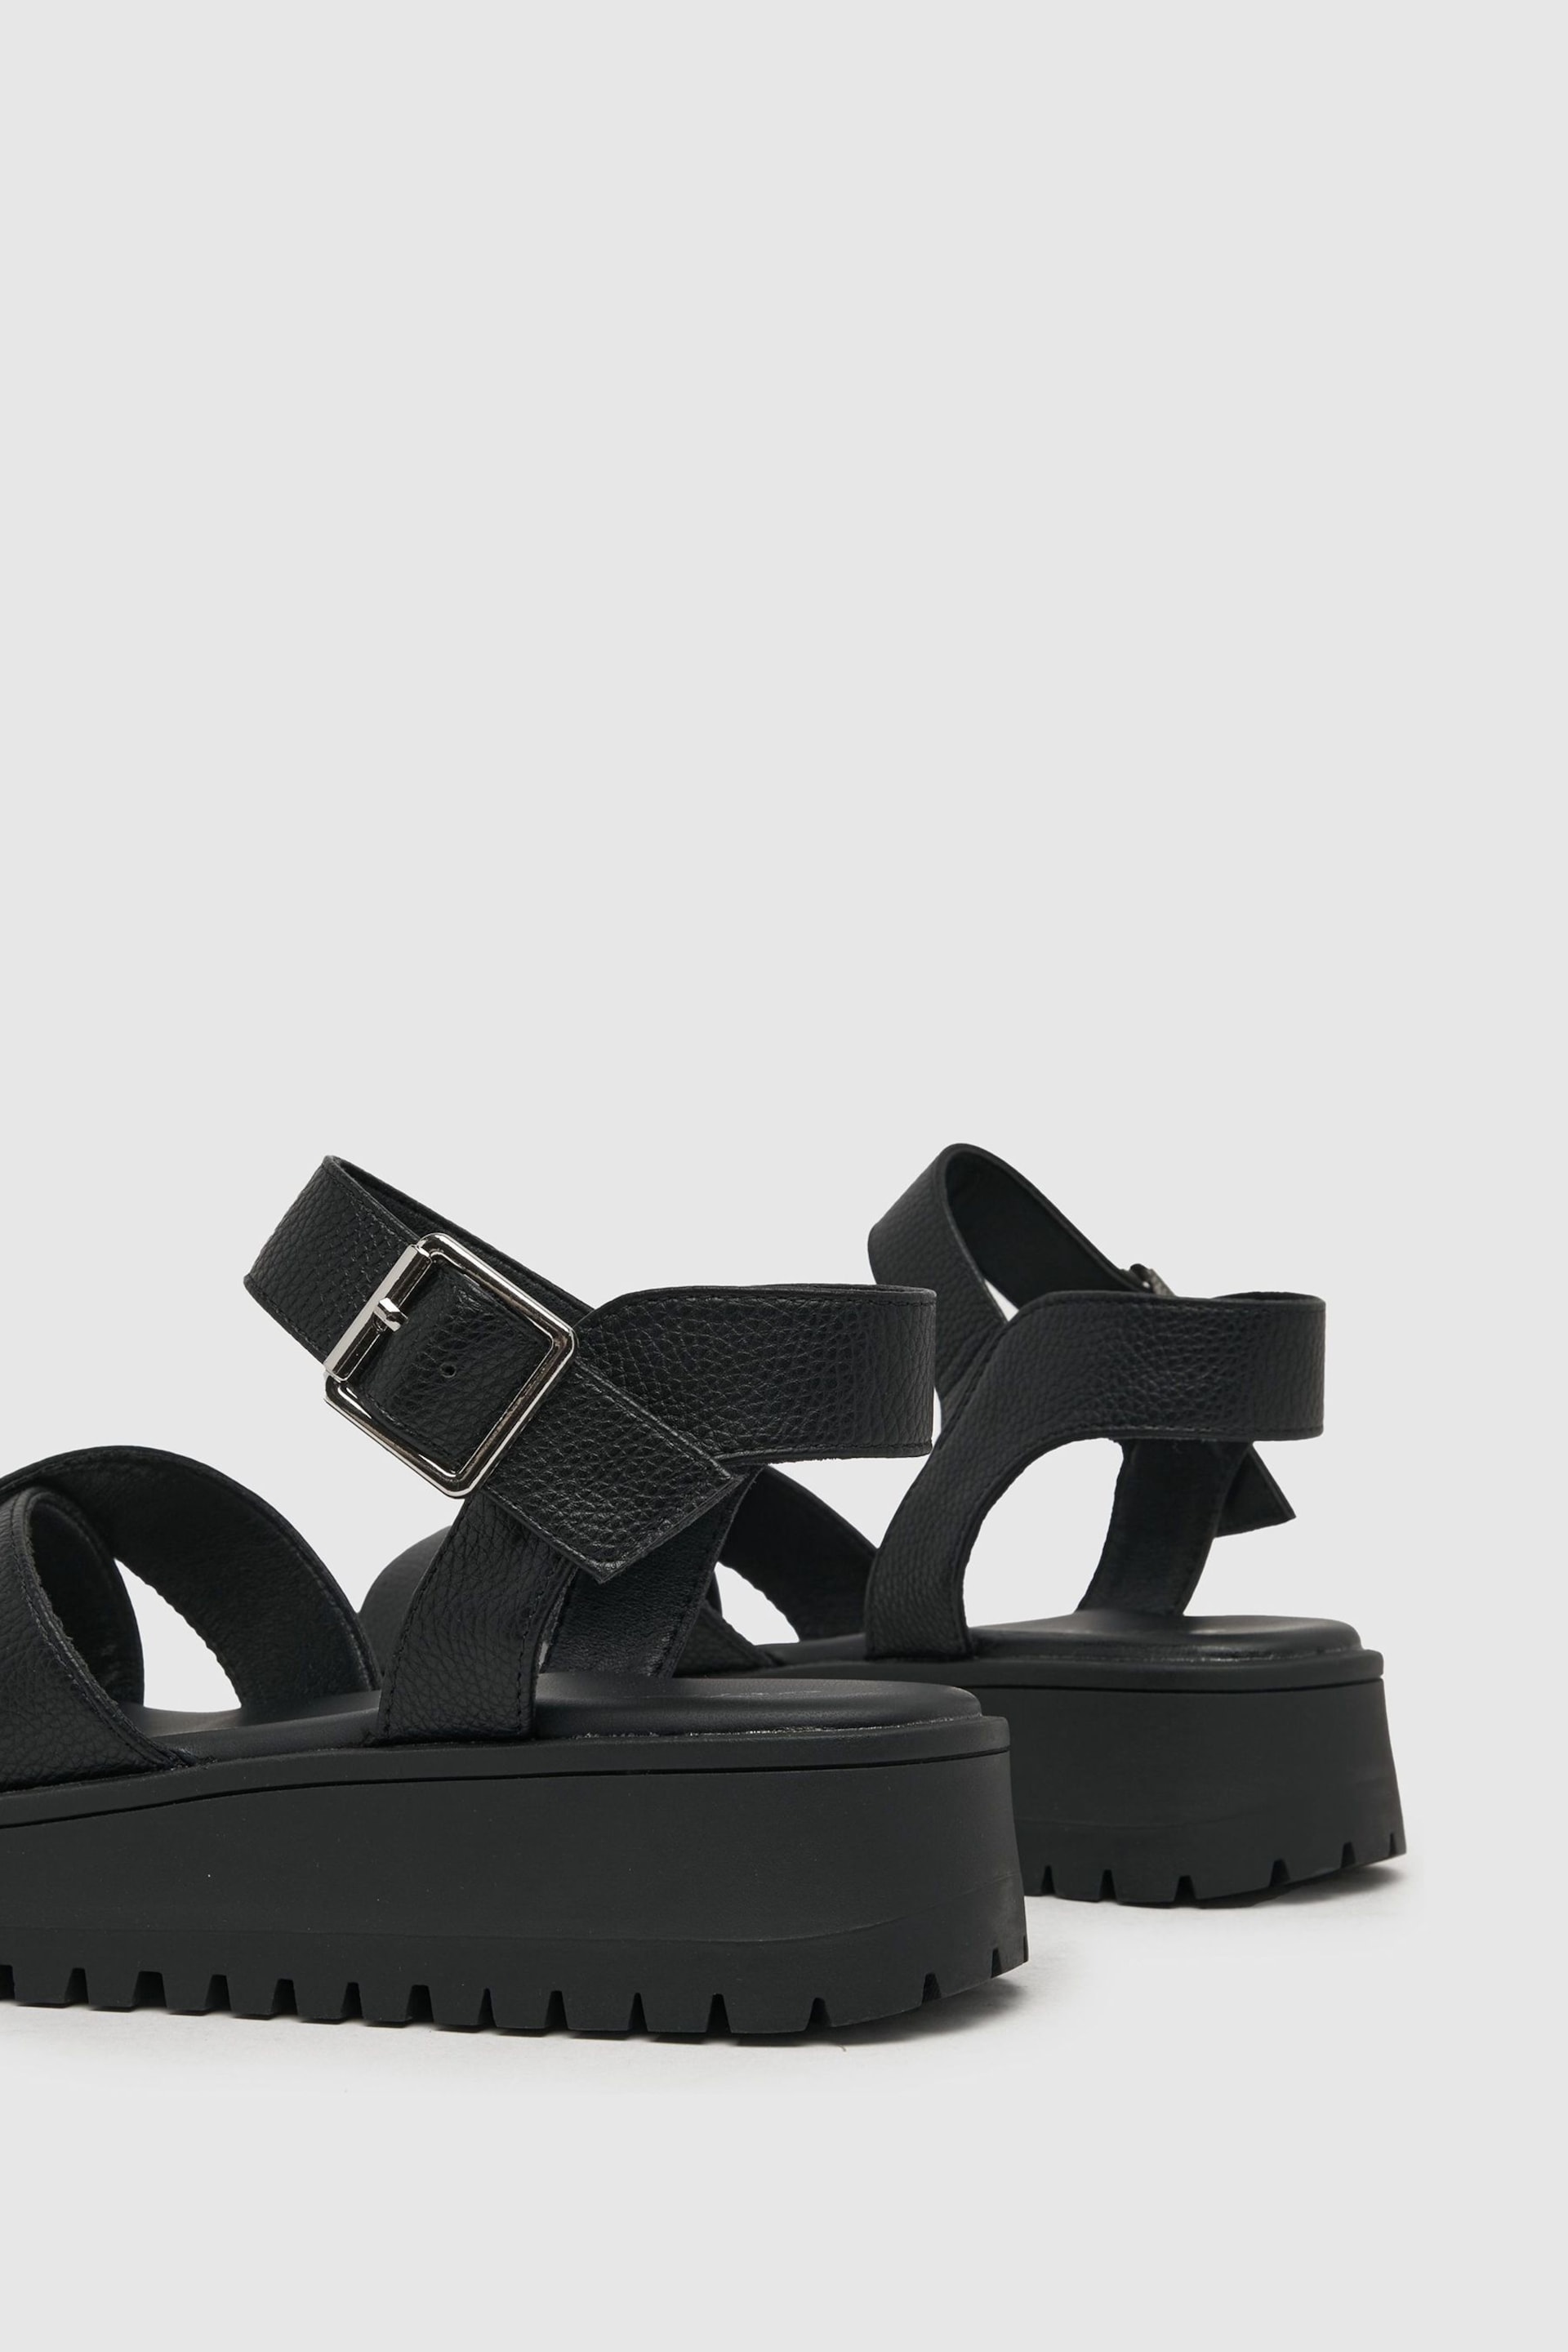 Schuh Wide Fit Tera Cross-Strap Sandals - Image 4 of 4